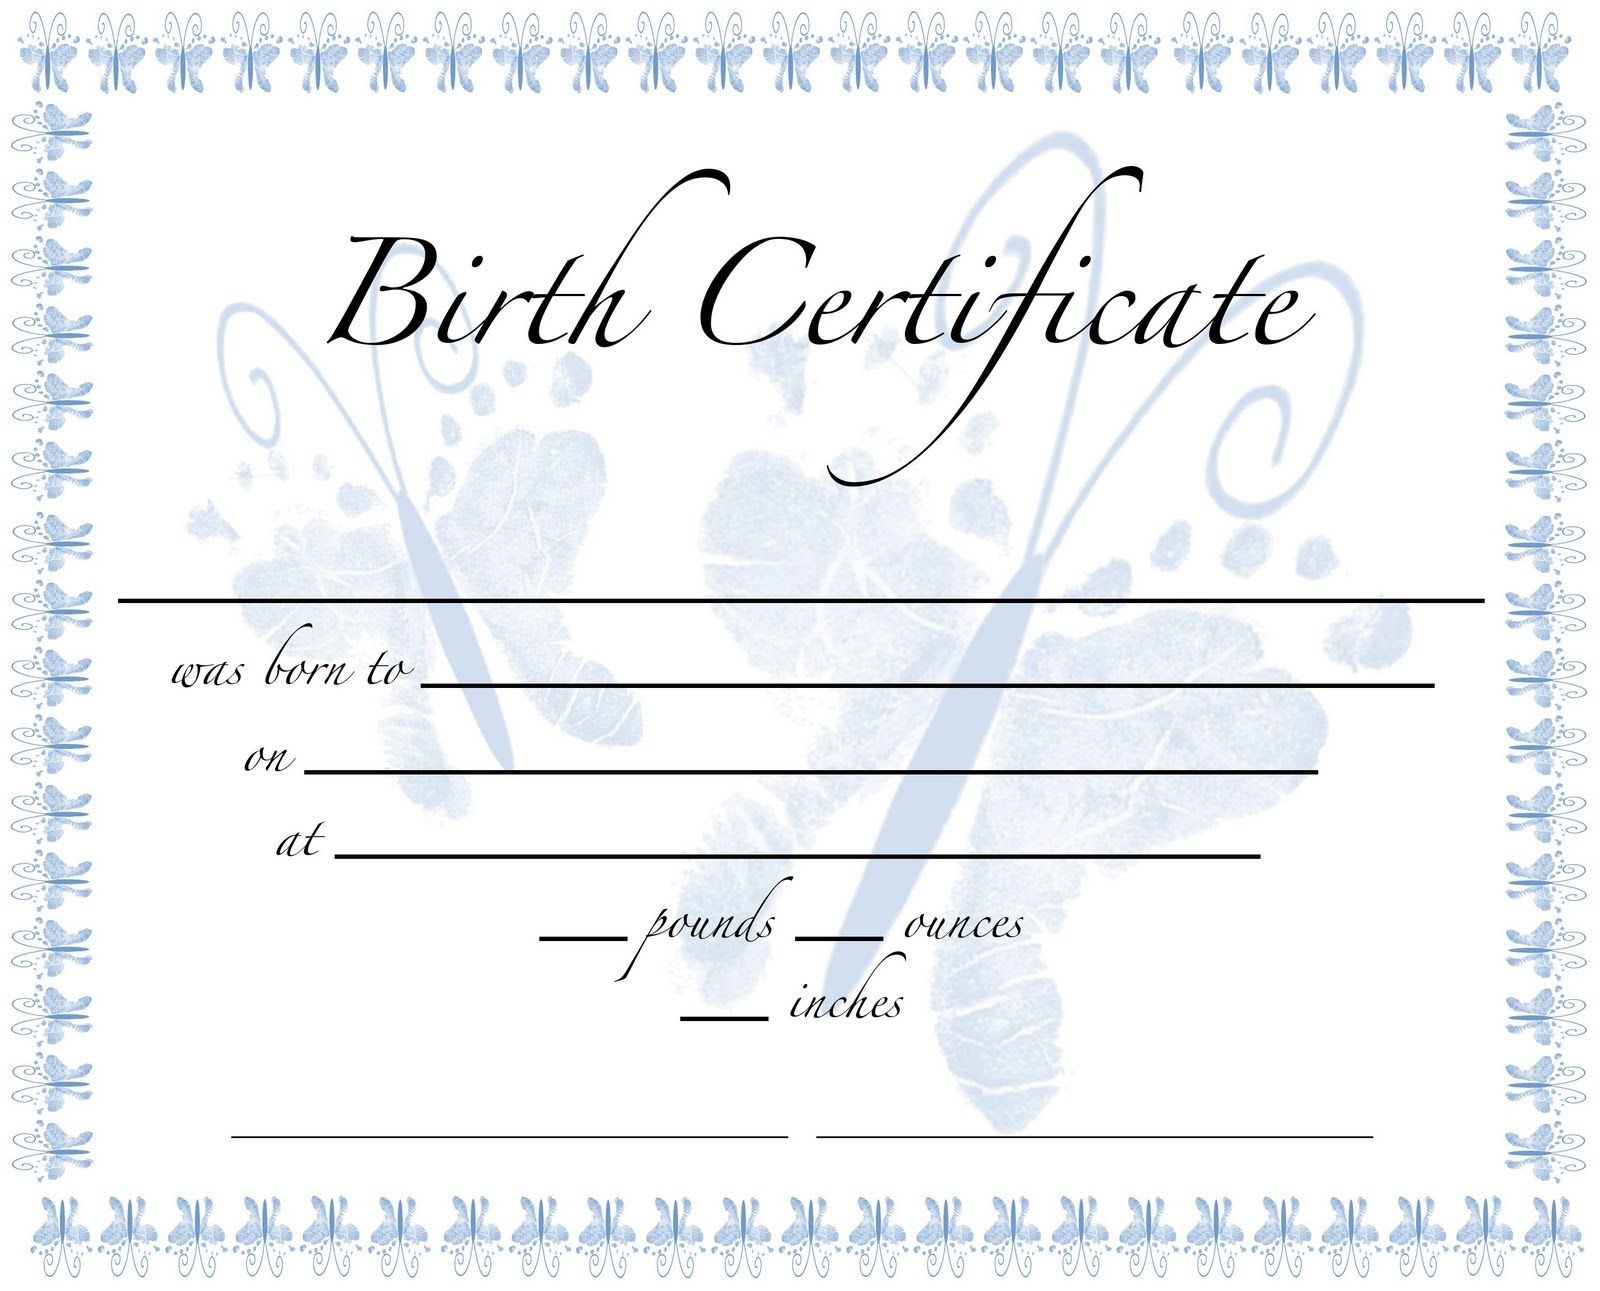 Pics For Birth Certificate Template School Project KgzRTLMd Reborn Free